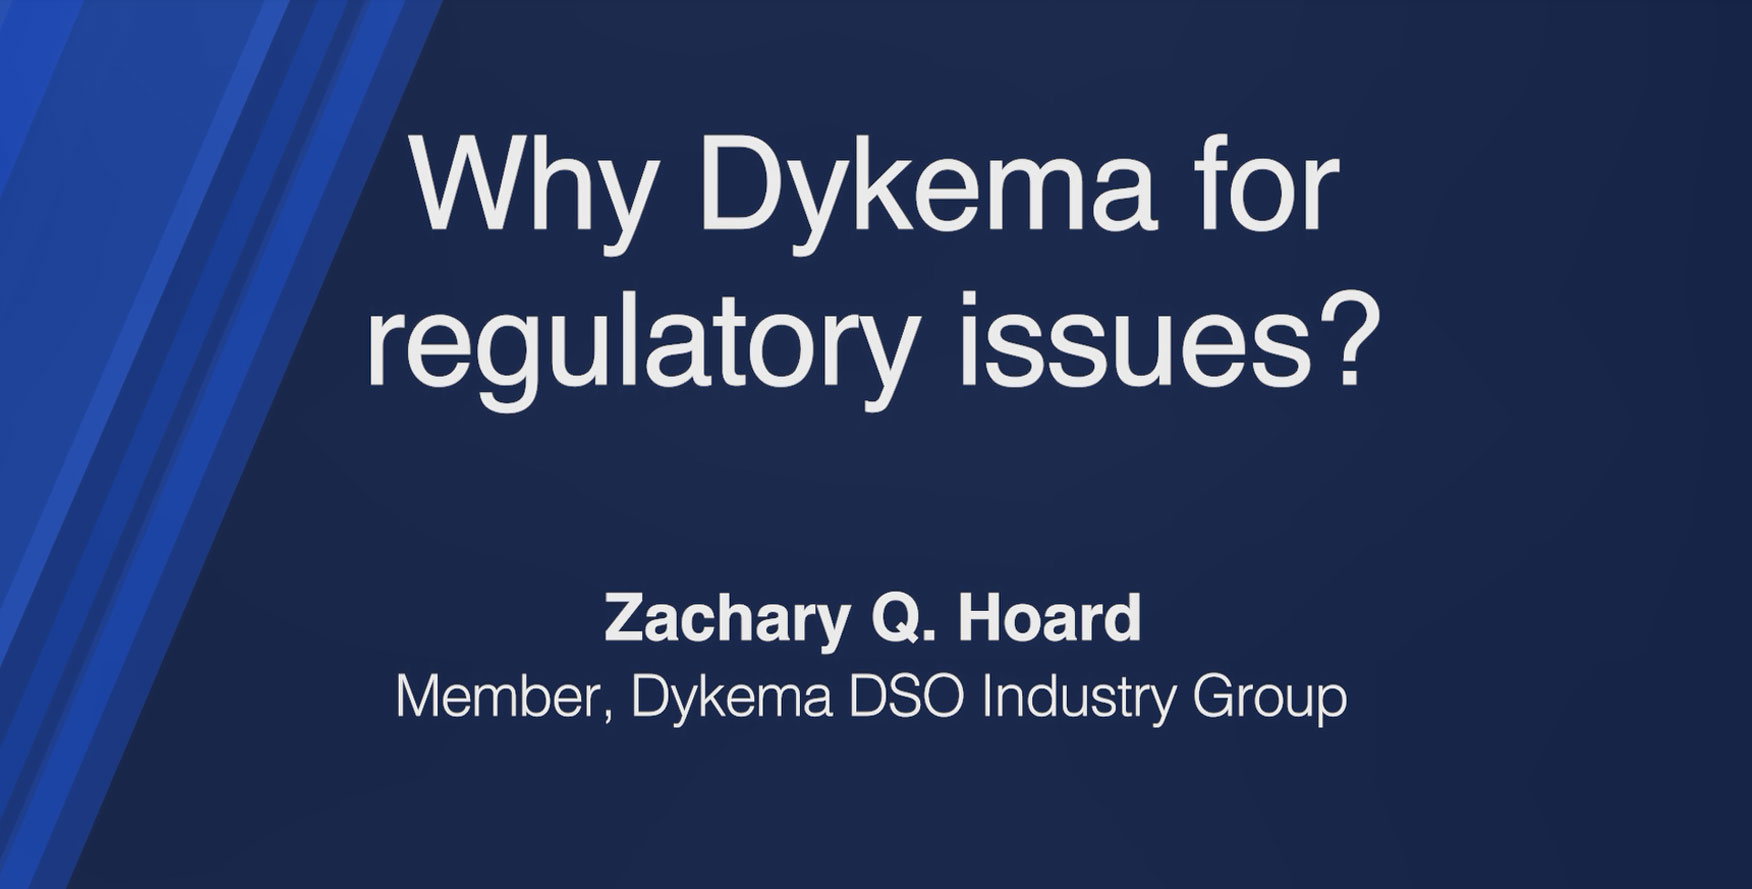 Why Dykema for Regulatory Issues?